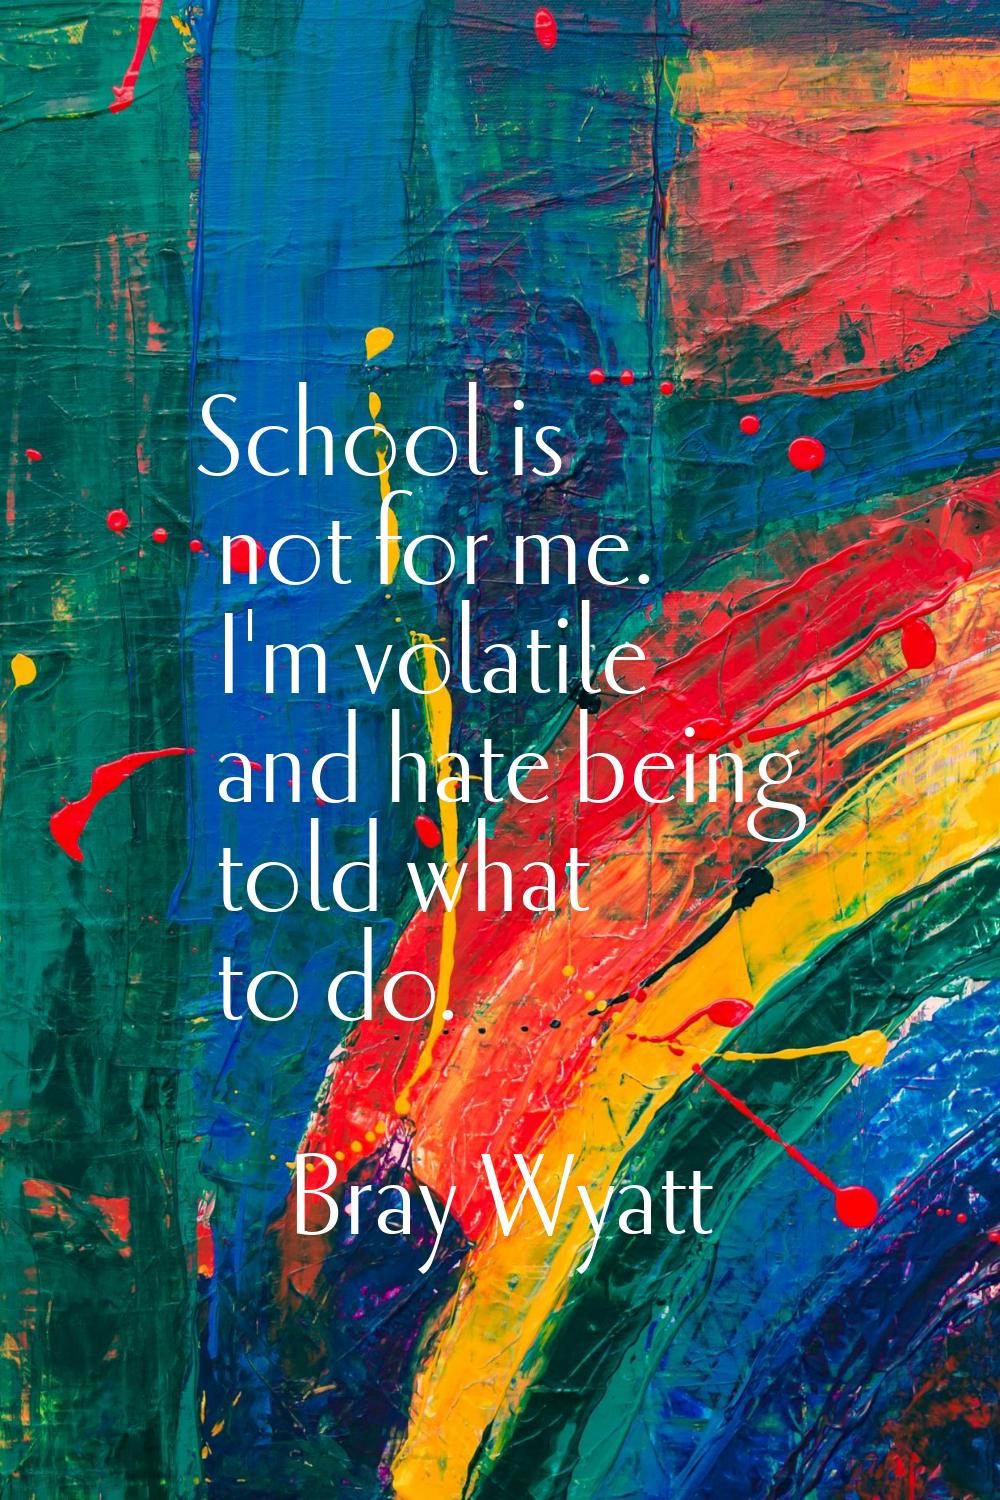 School is not for me. I'm volatile and hate being told what to do.